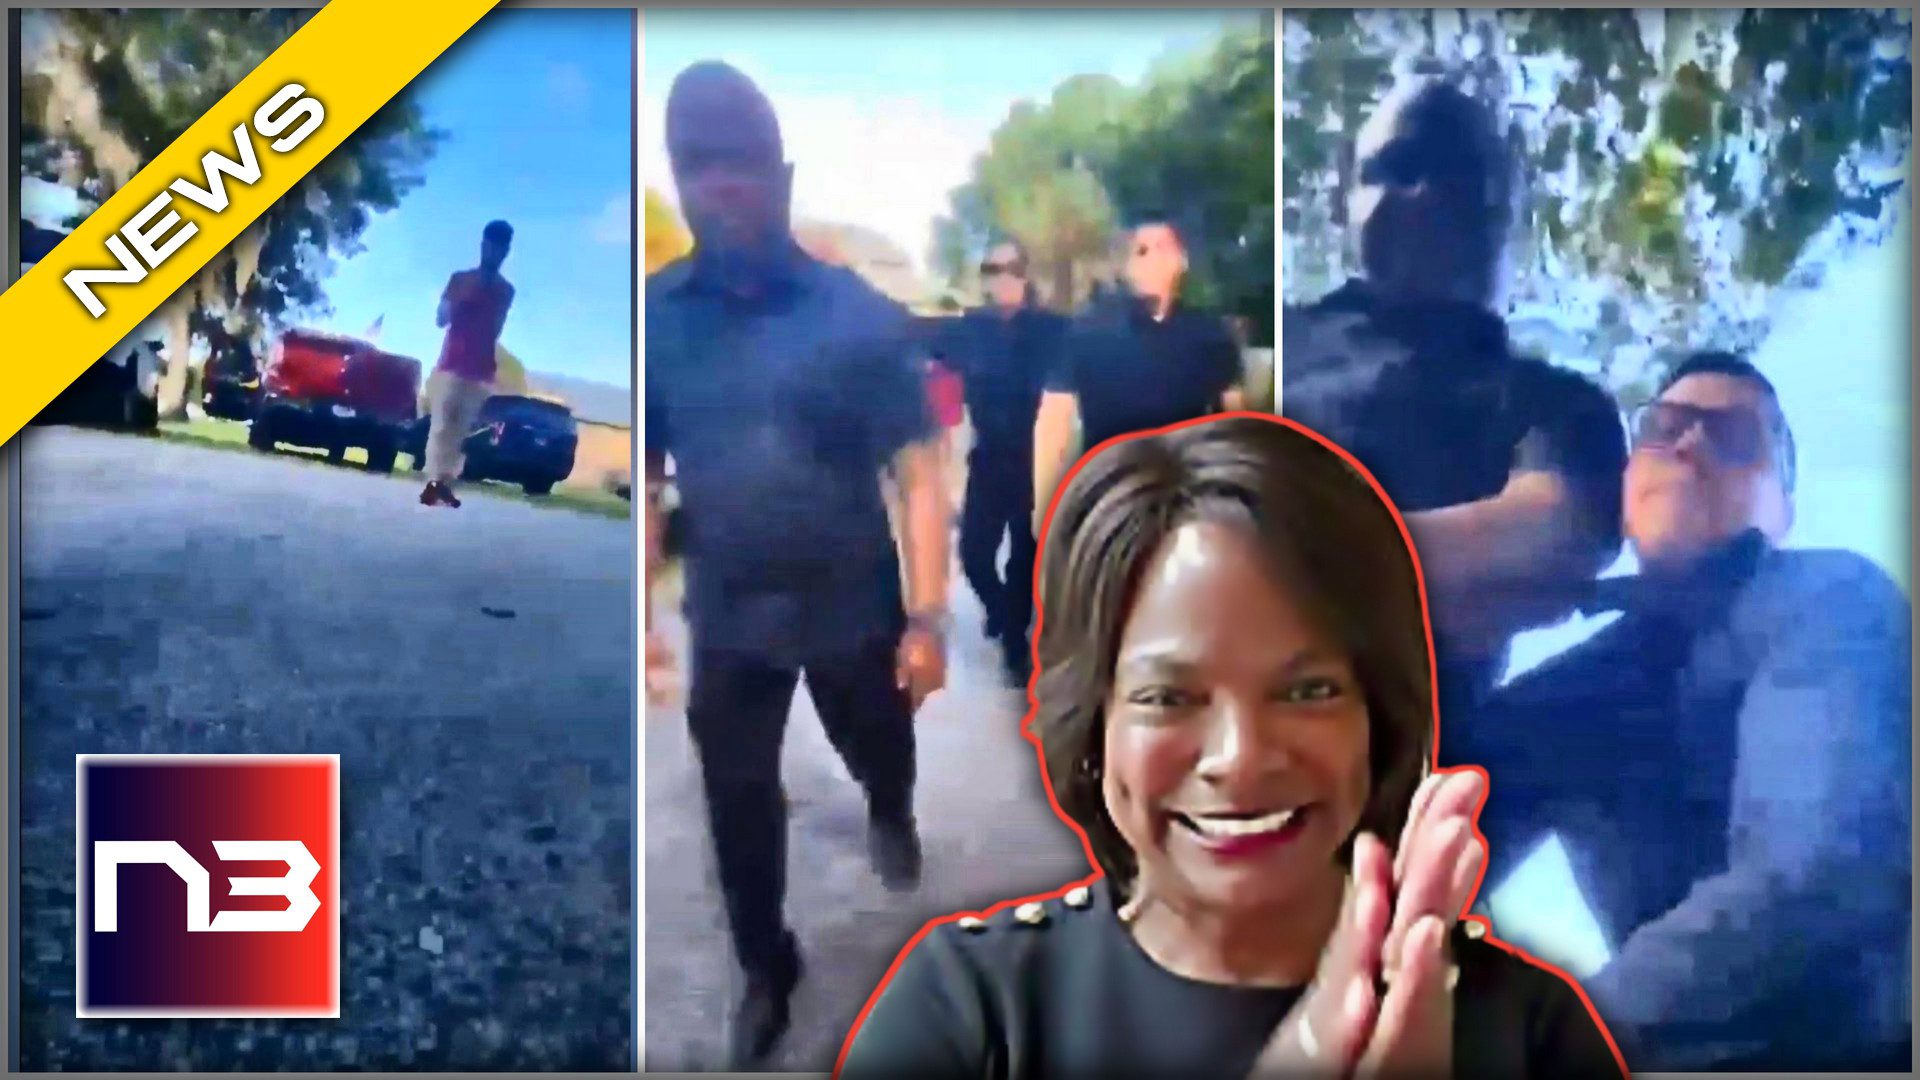 WATCH: Val Demings' security thugs caught on tape! Police launch probe! The end of her career?